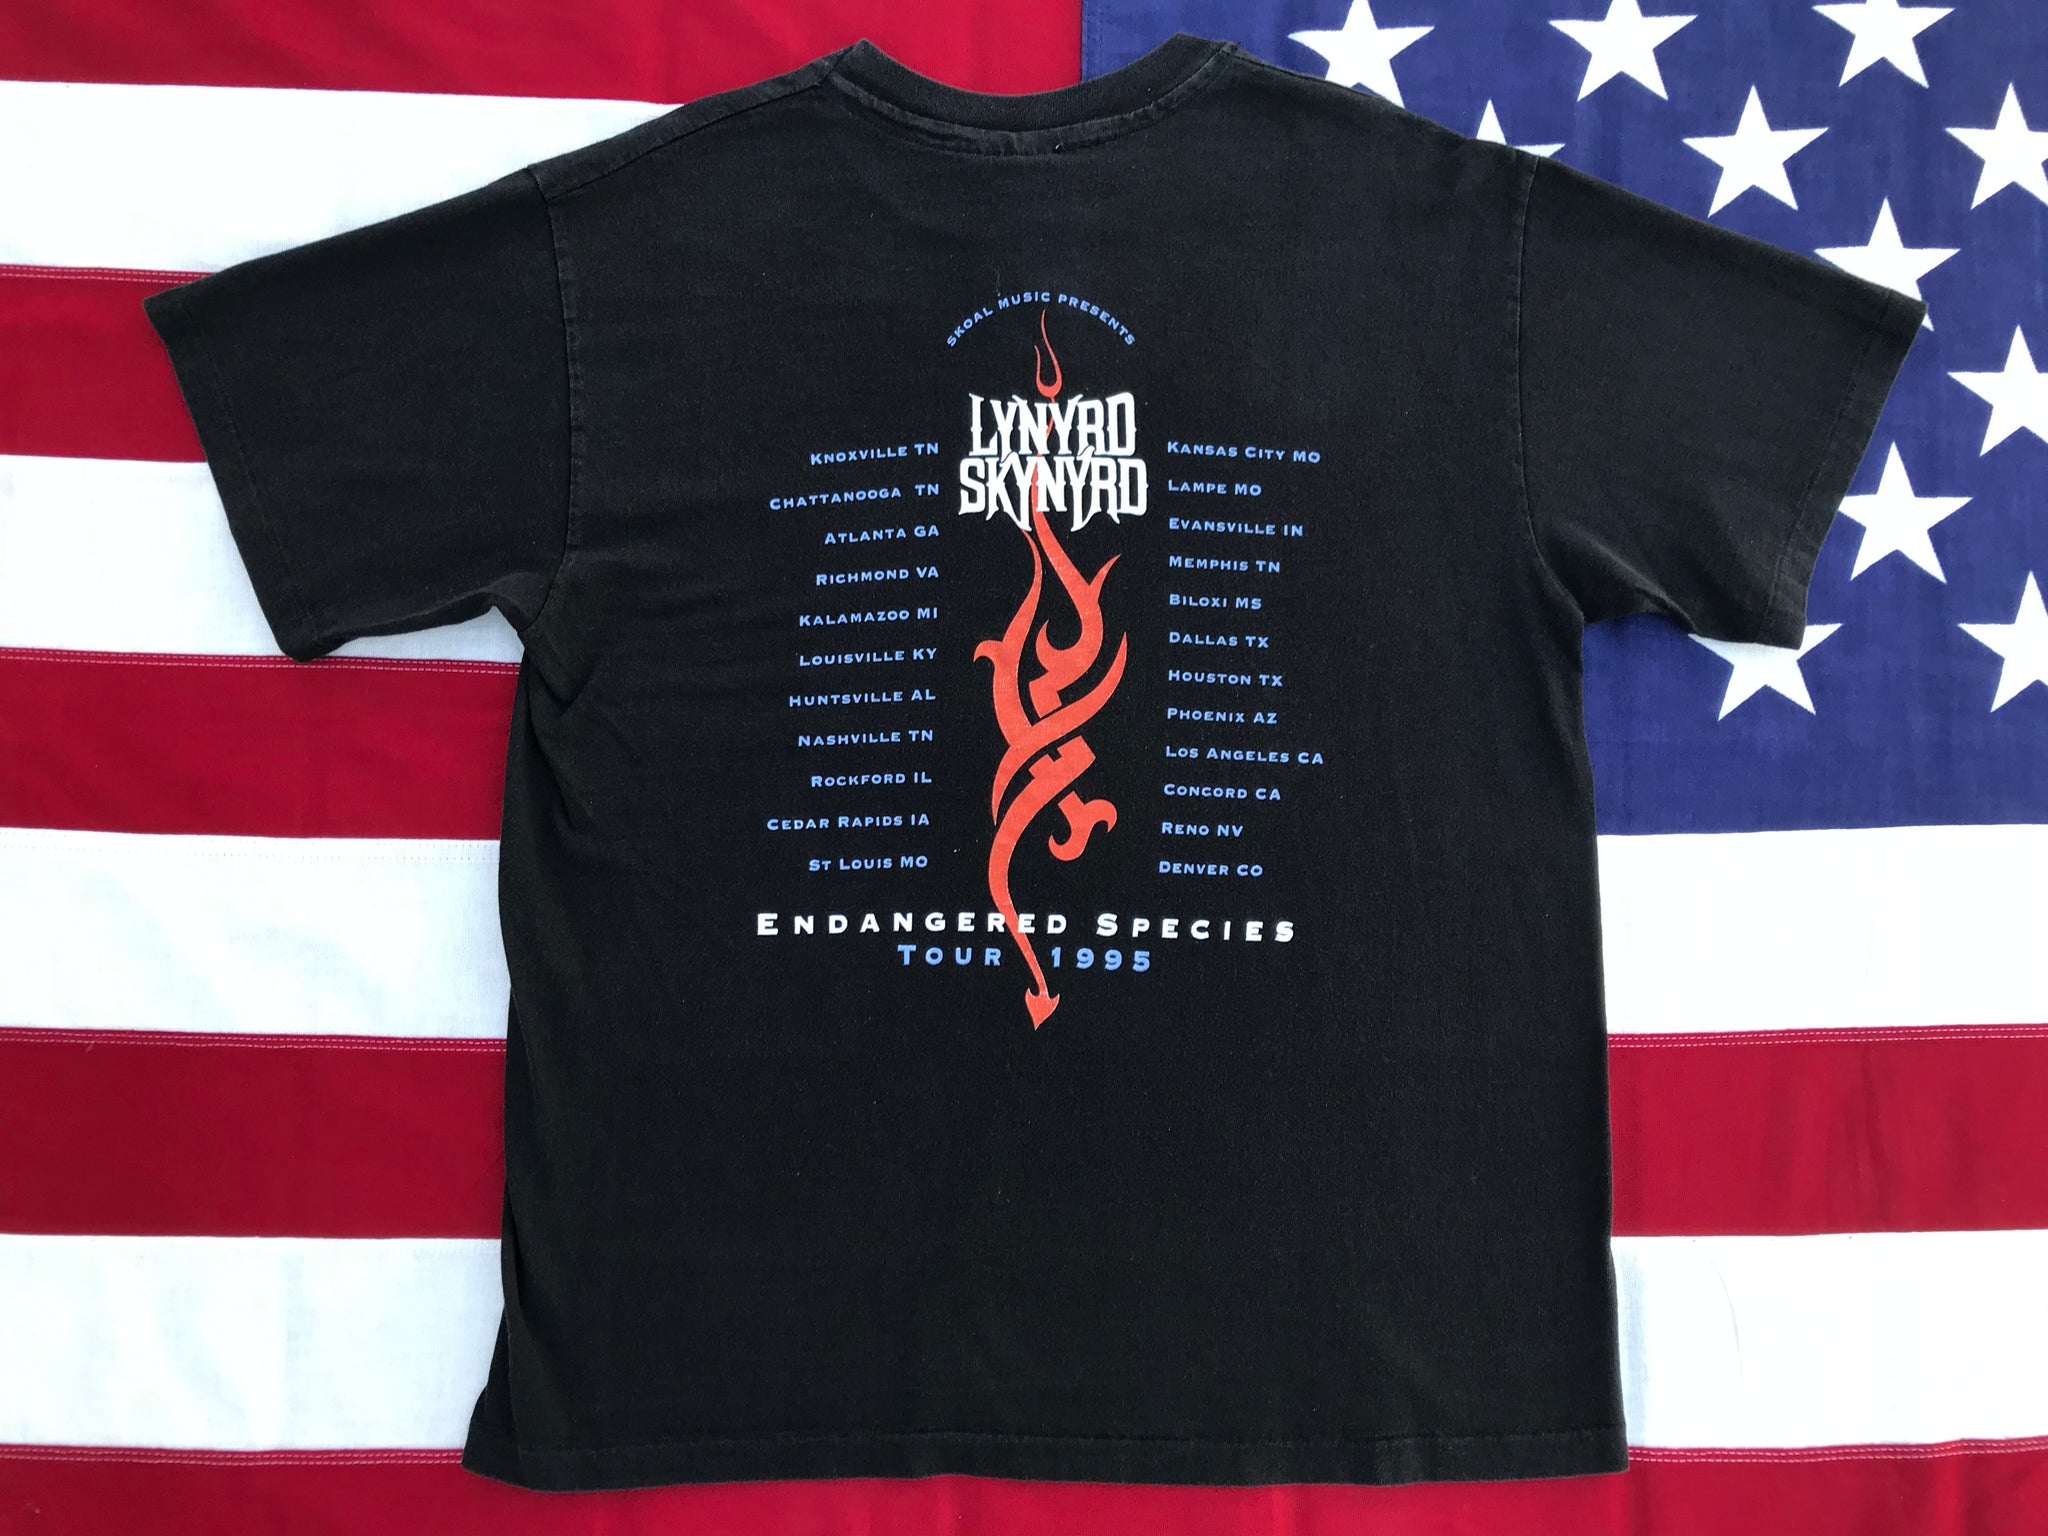 Lynyrd Skynyrd 1995 “ Endangered Species Tour “Original Vintage Rock T-Shirt by Hanes Made in USA